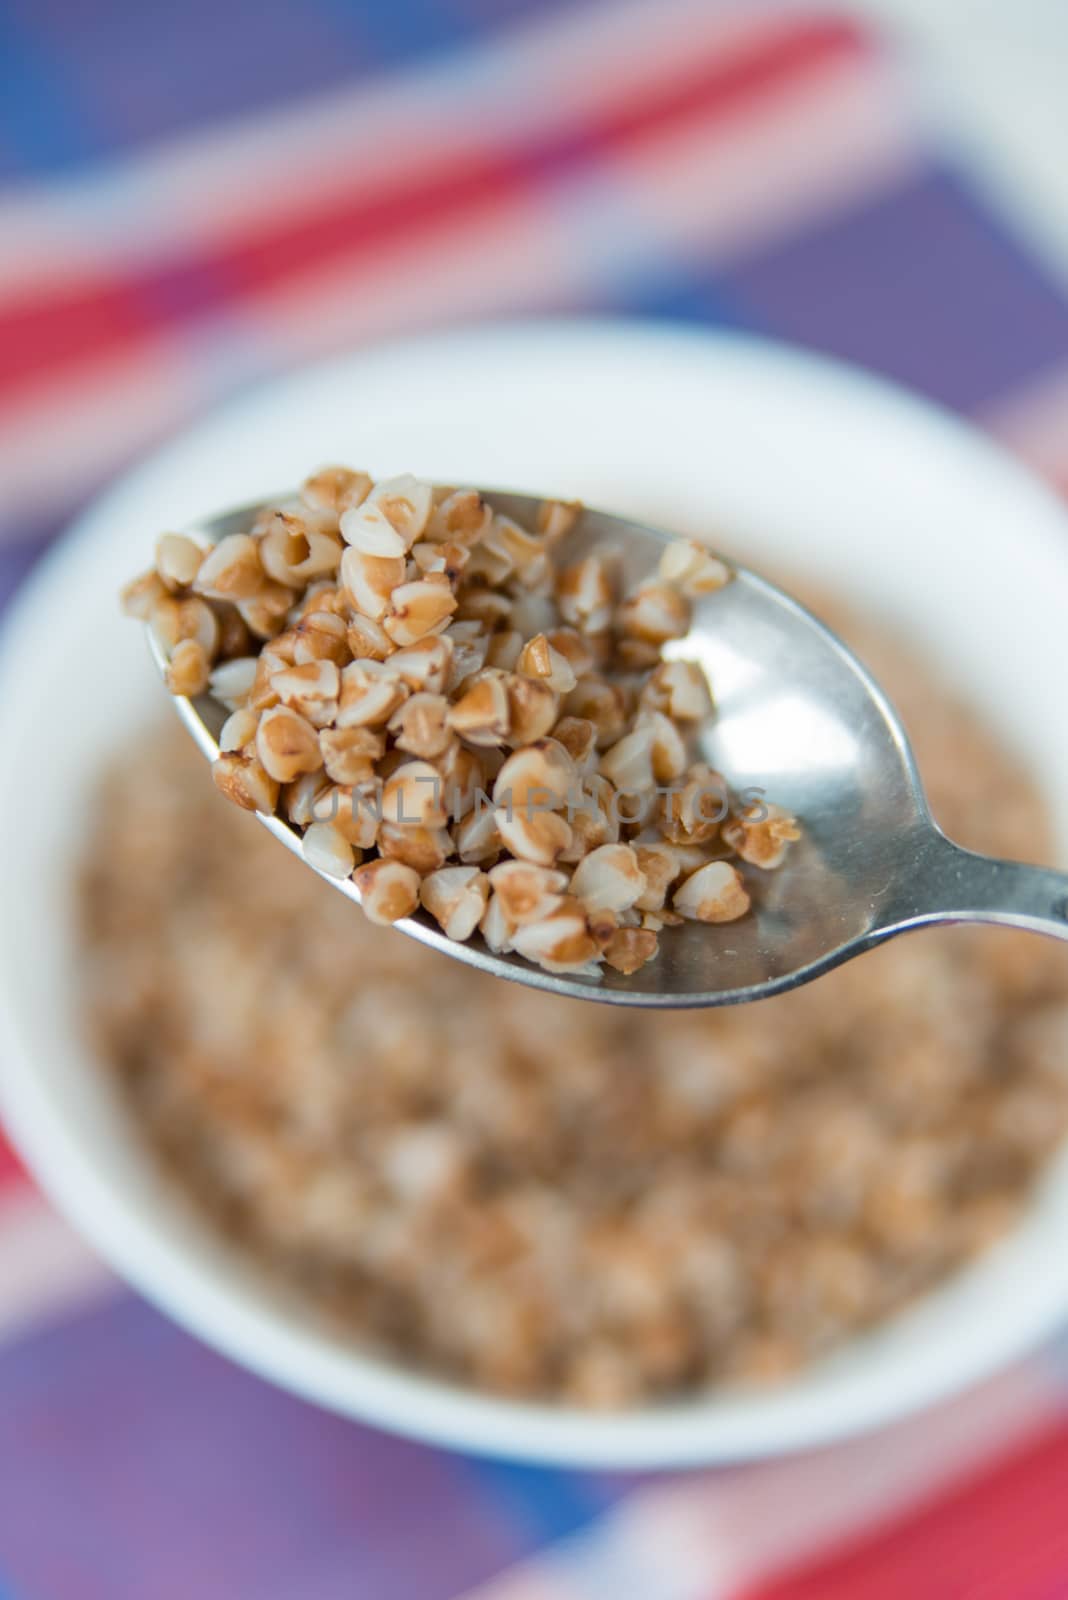 Vertical photo of the buckwheat cereal in the spoon